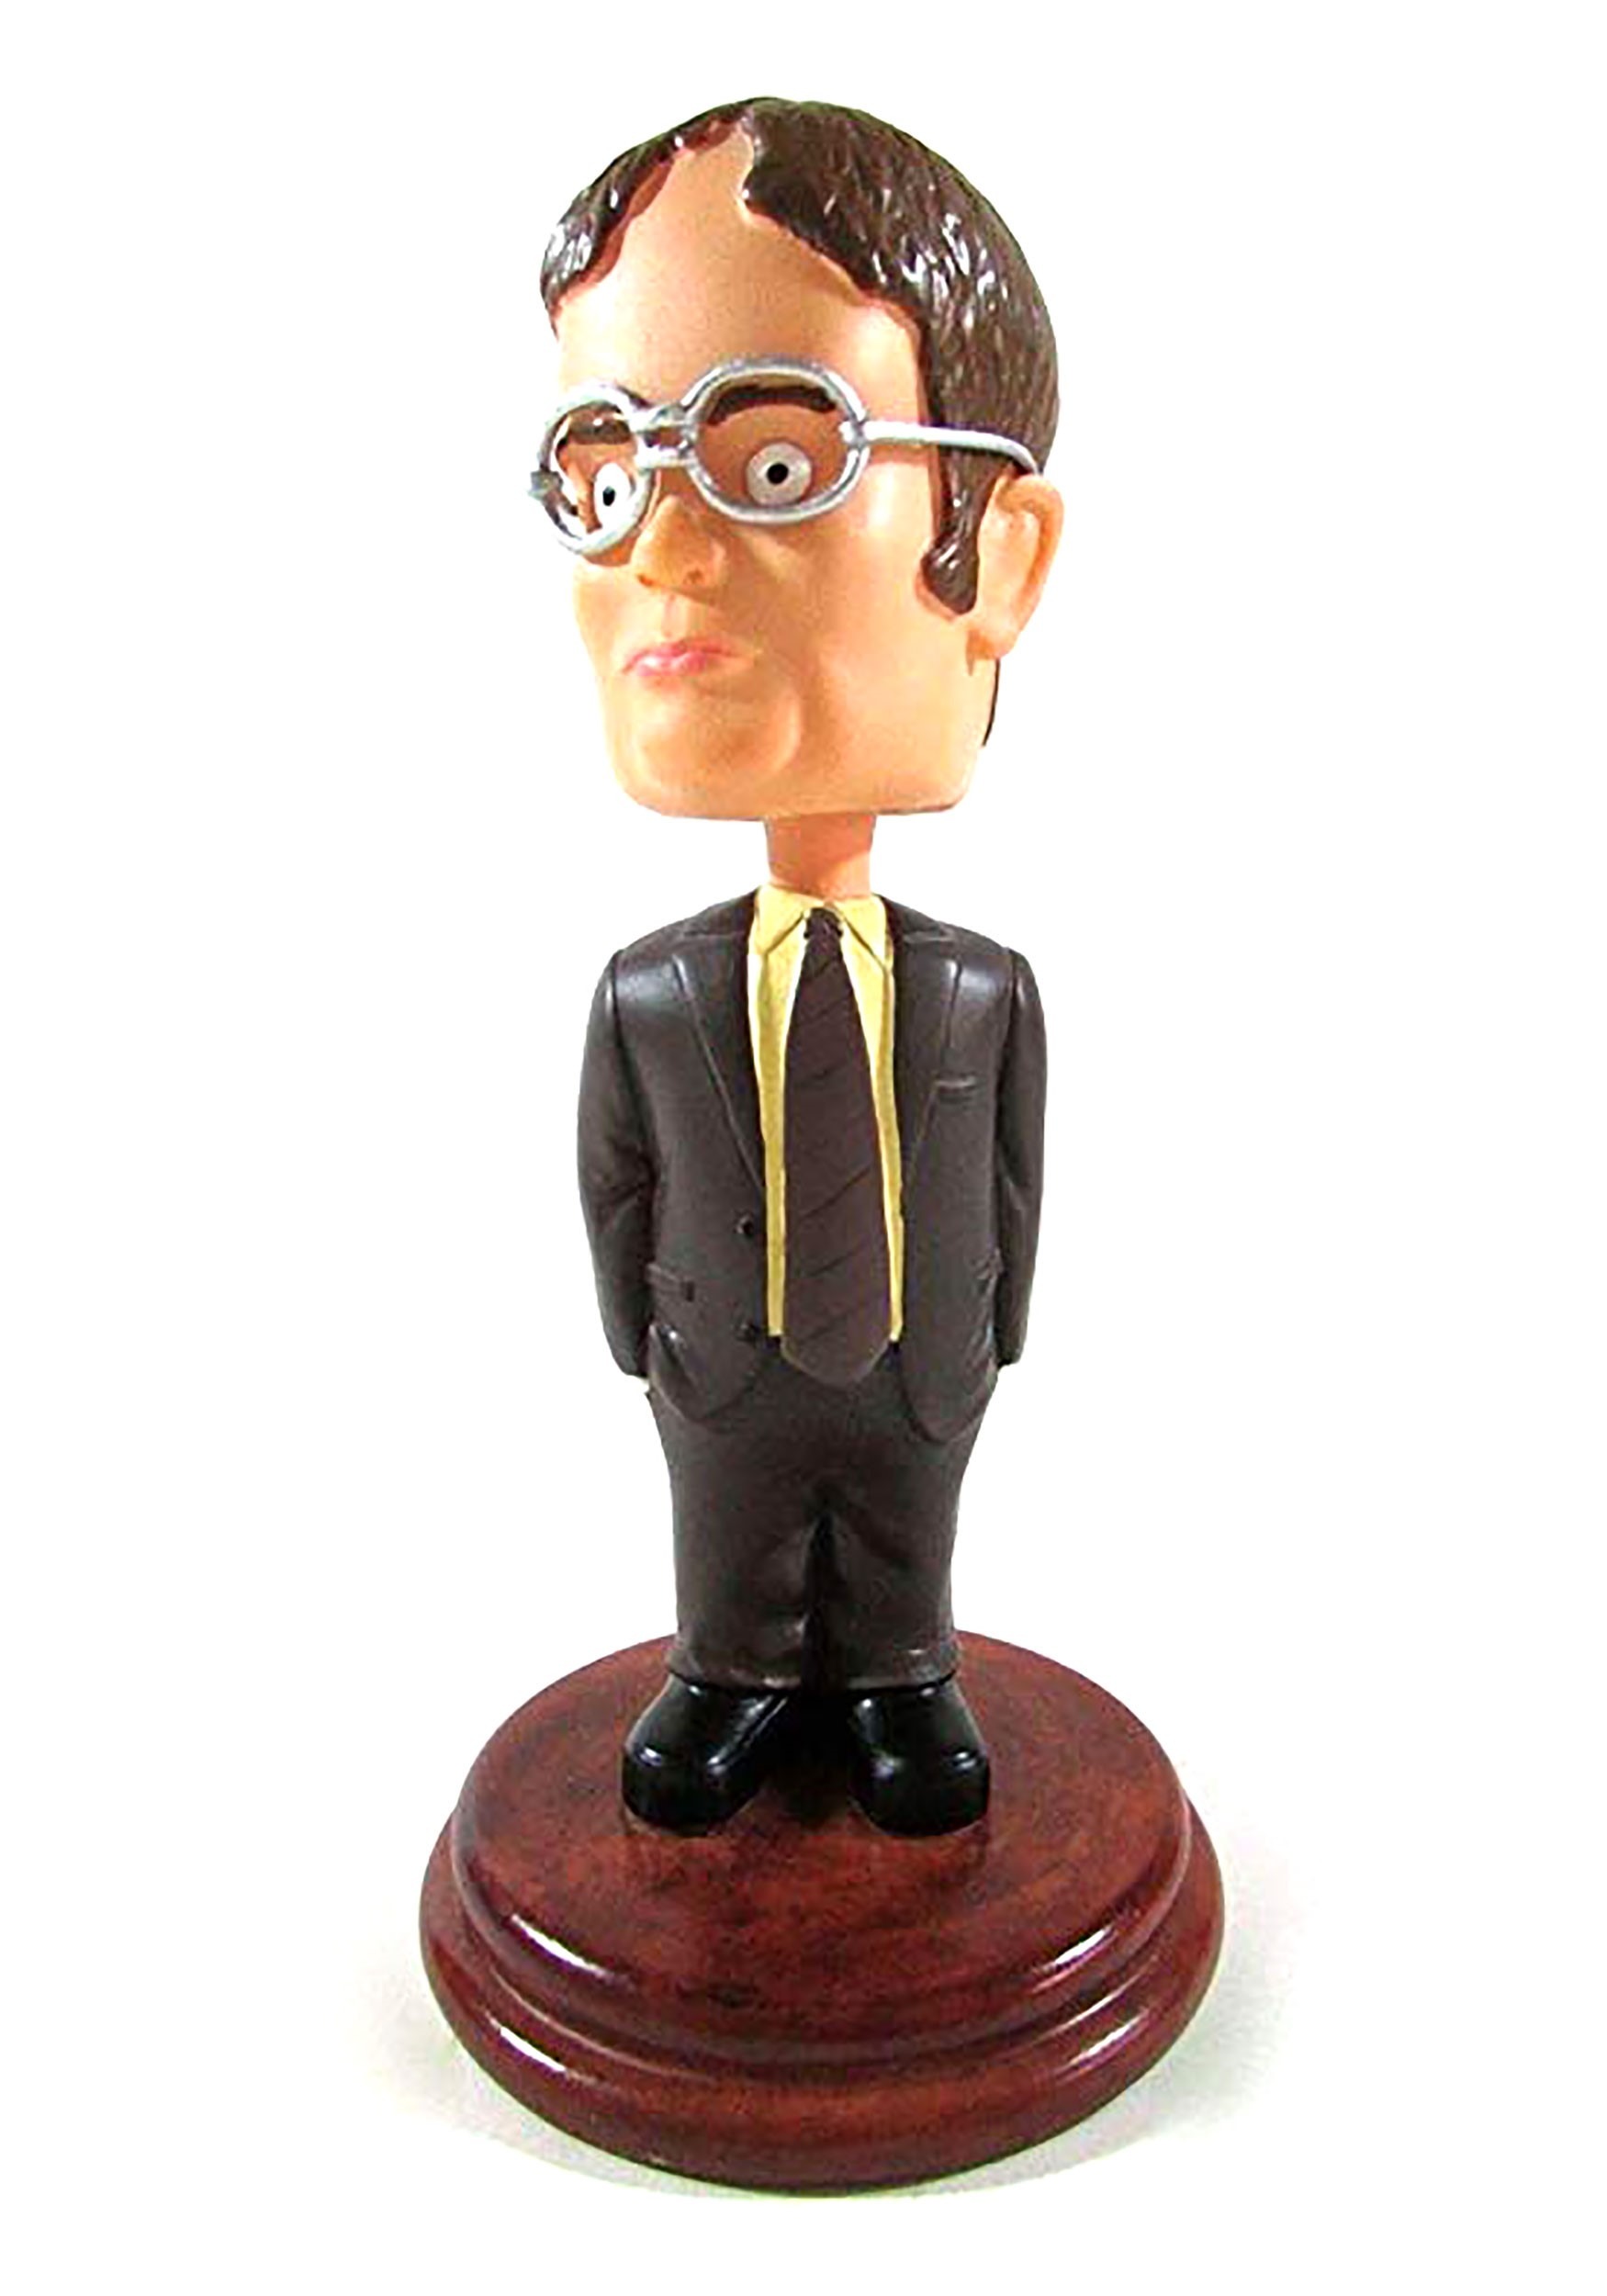 7"Dwight Bobblehead Figure from The Office